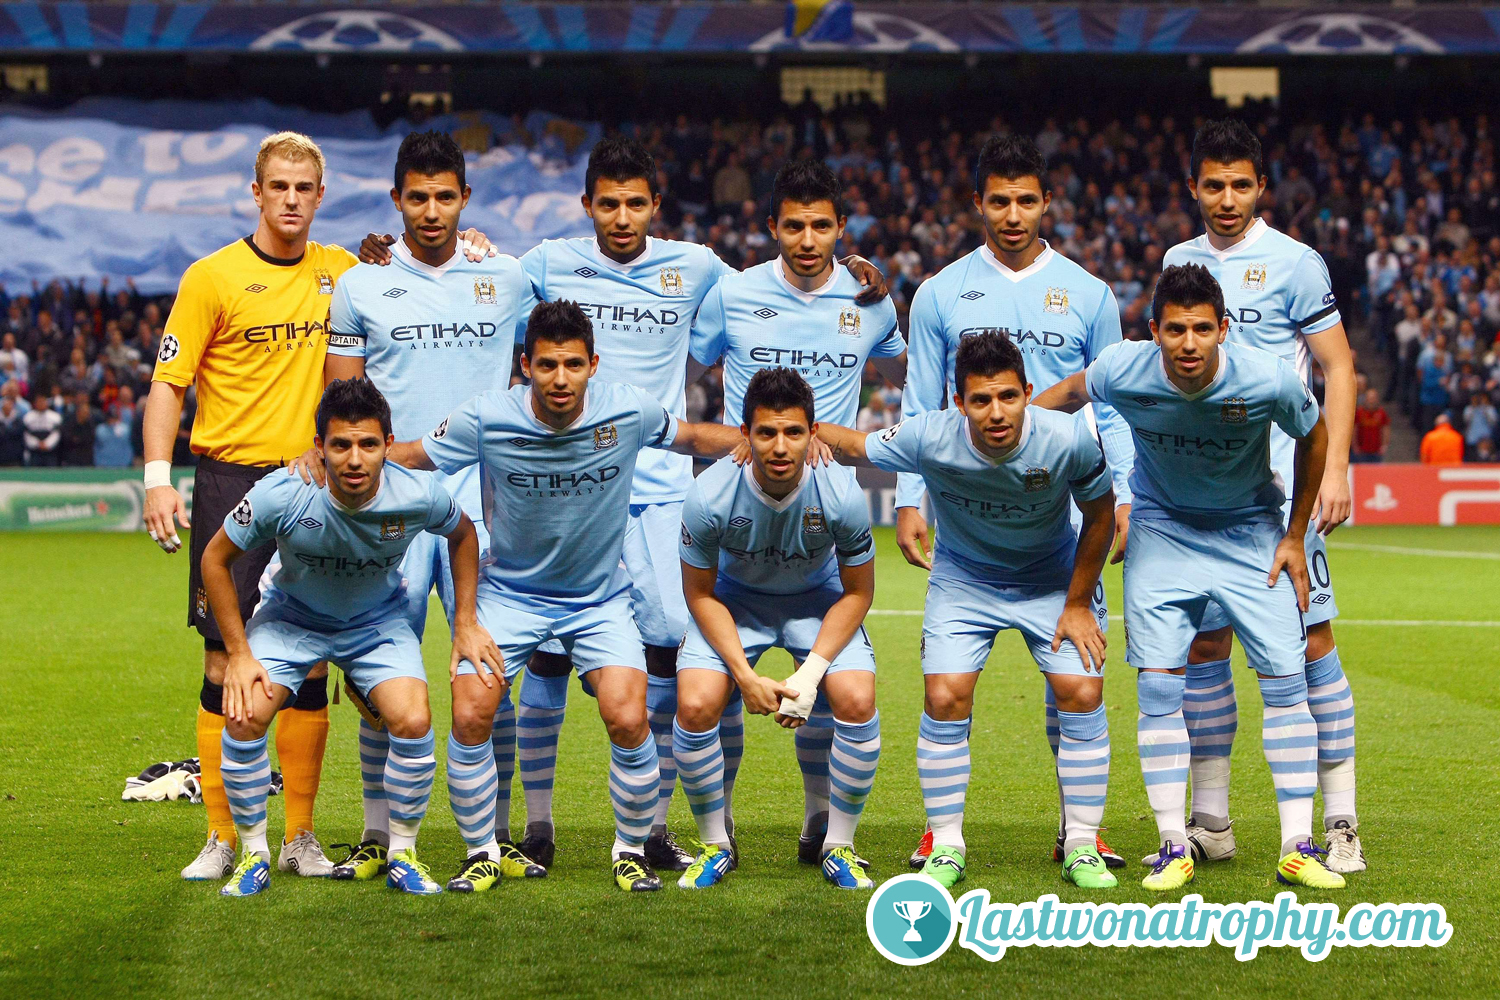 Joe Hart didn't know what to think in last nights team photo